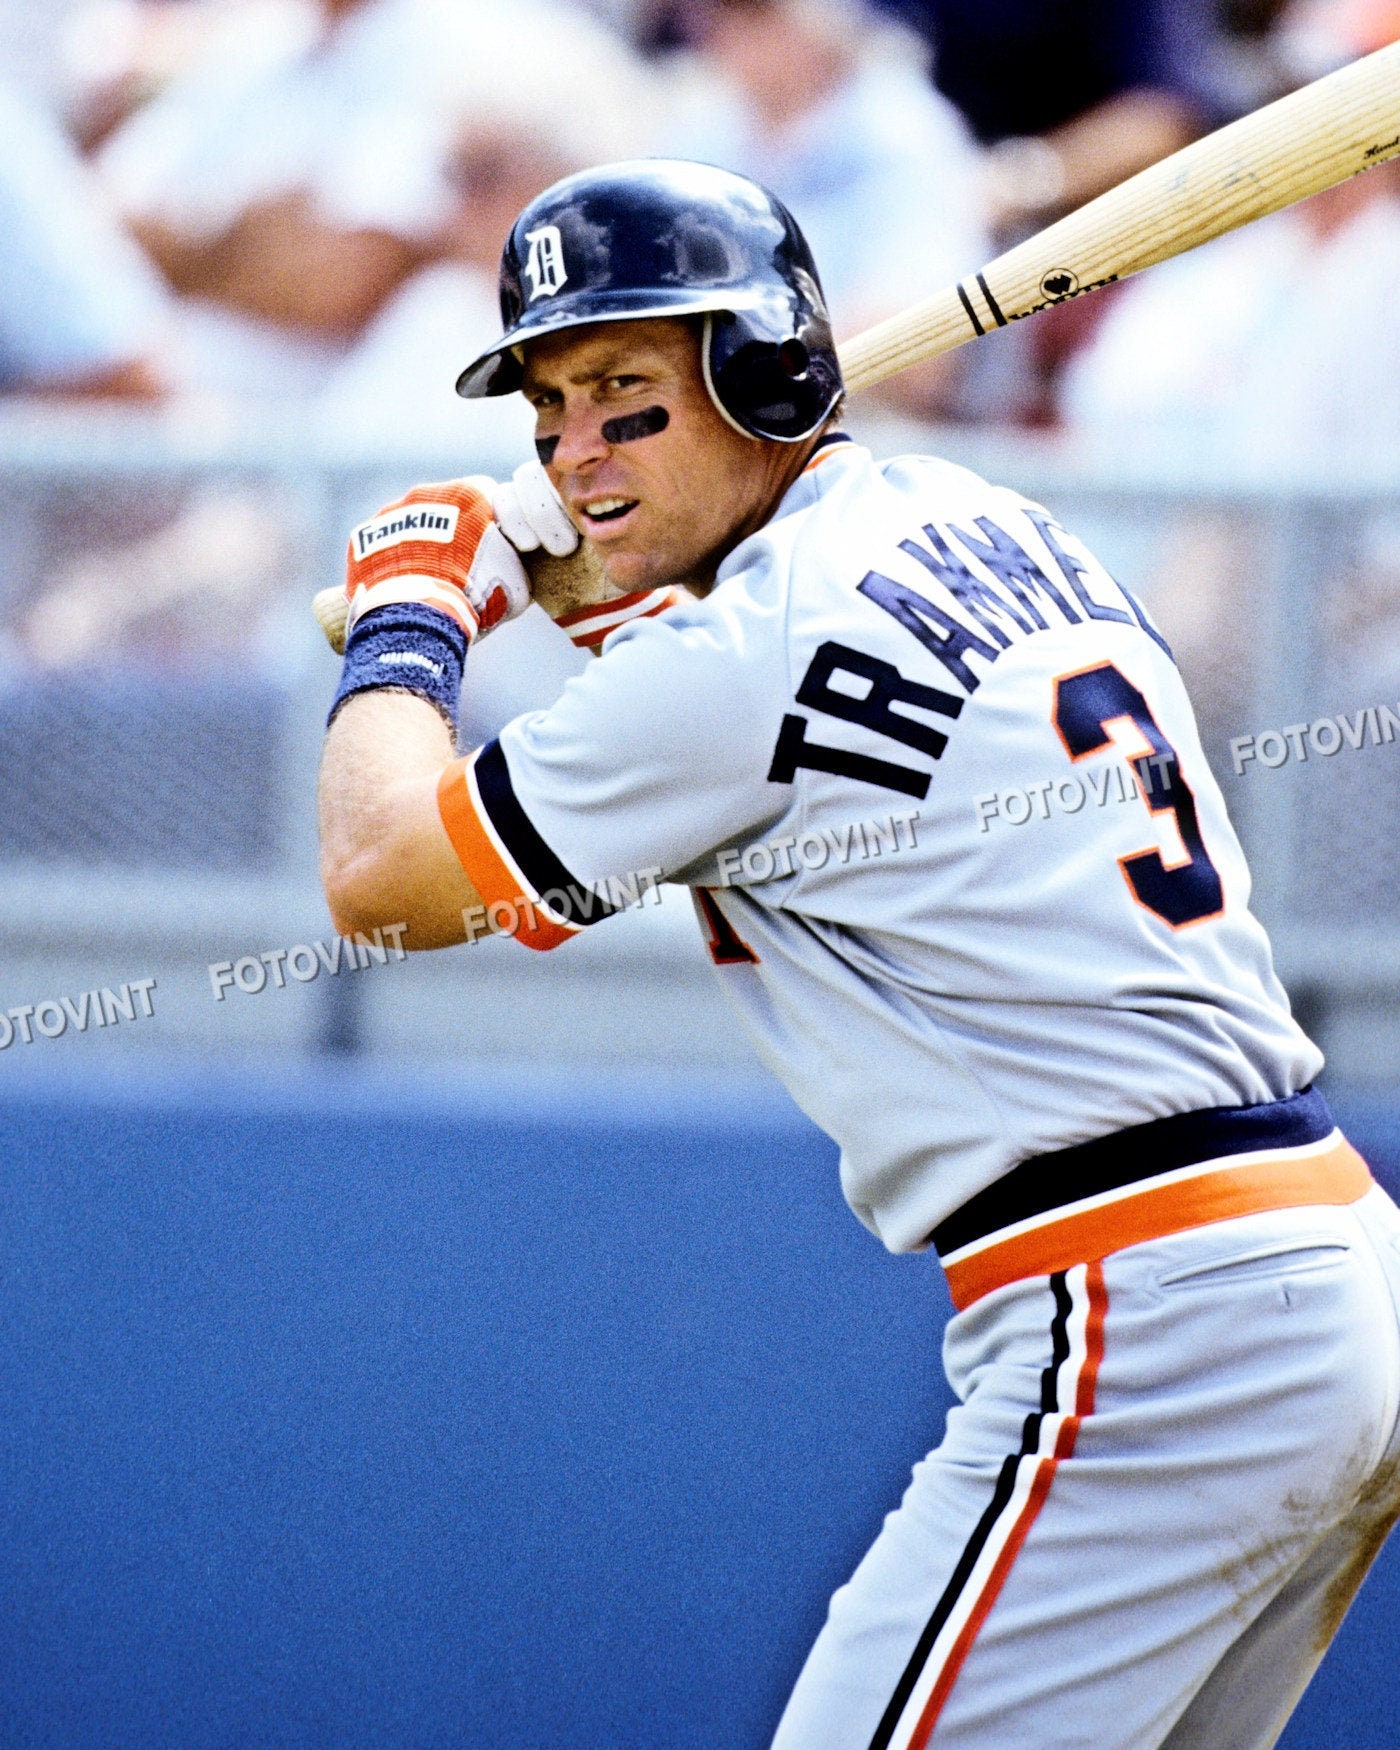 ALAN TRAMMELL Photo Picture DETROIT Tigers Baseball Photograph Print 8x10,  8.5x11, 11x14 or 16x20 (AT2)